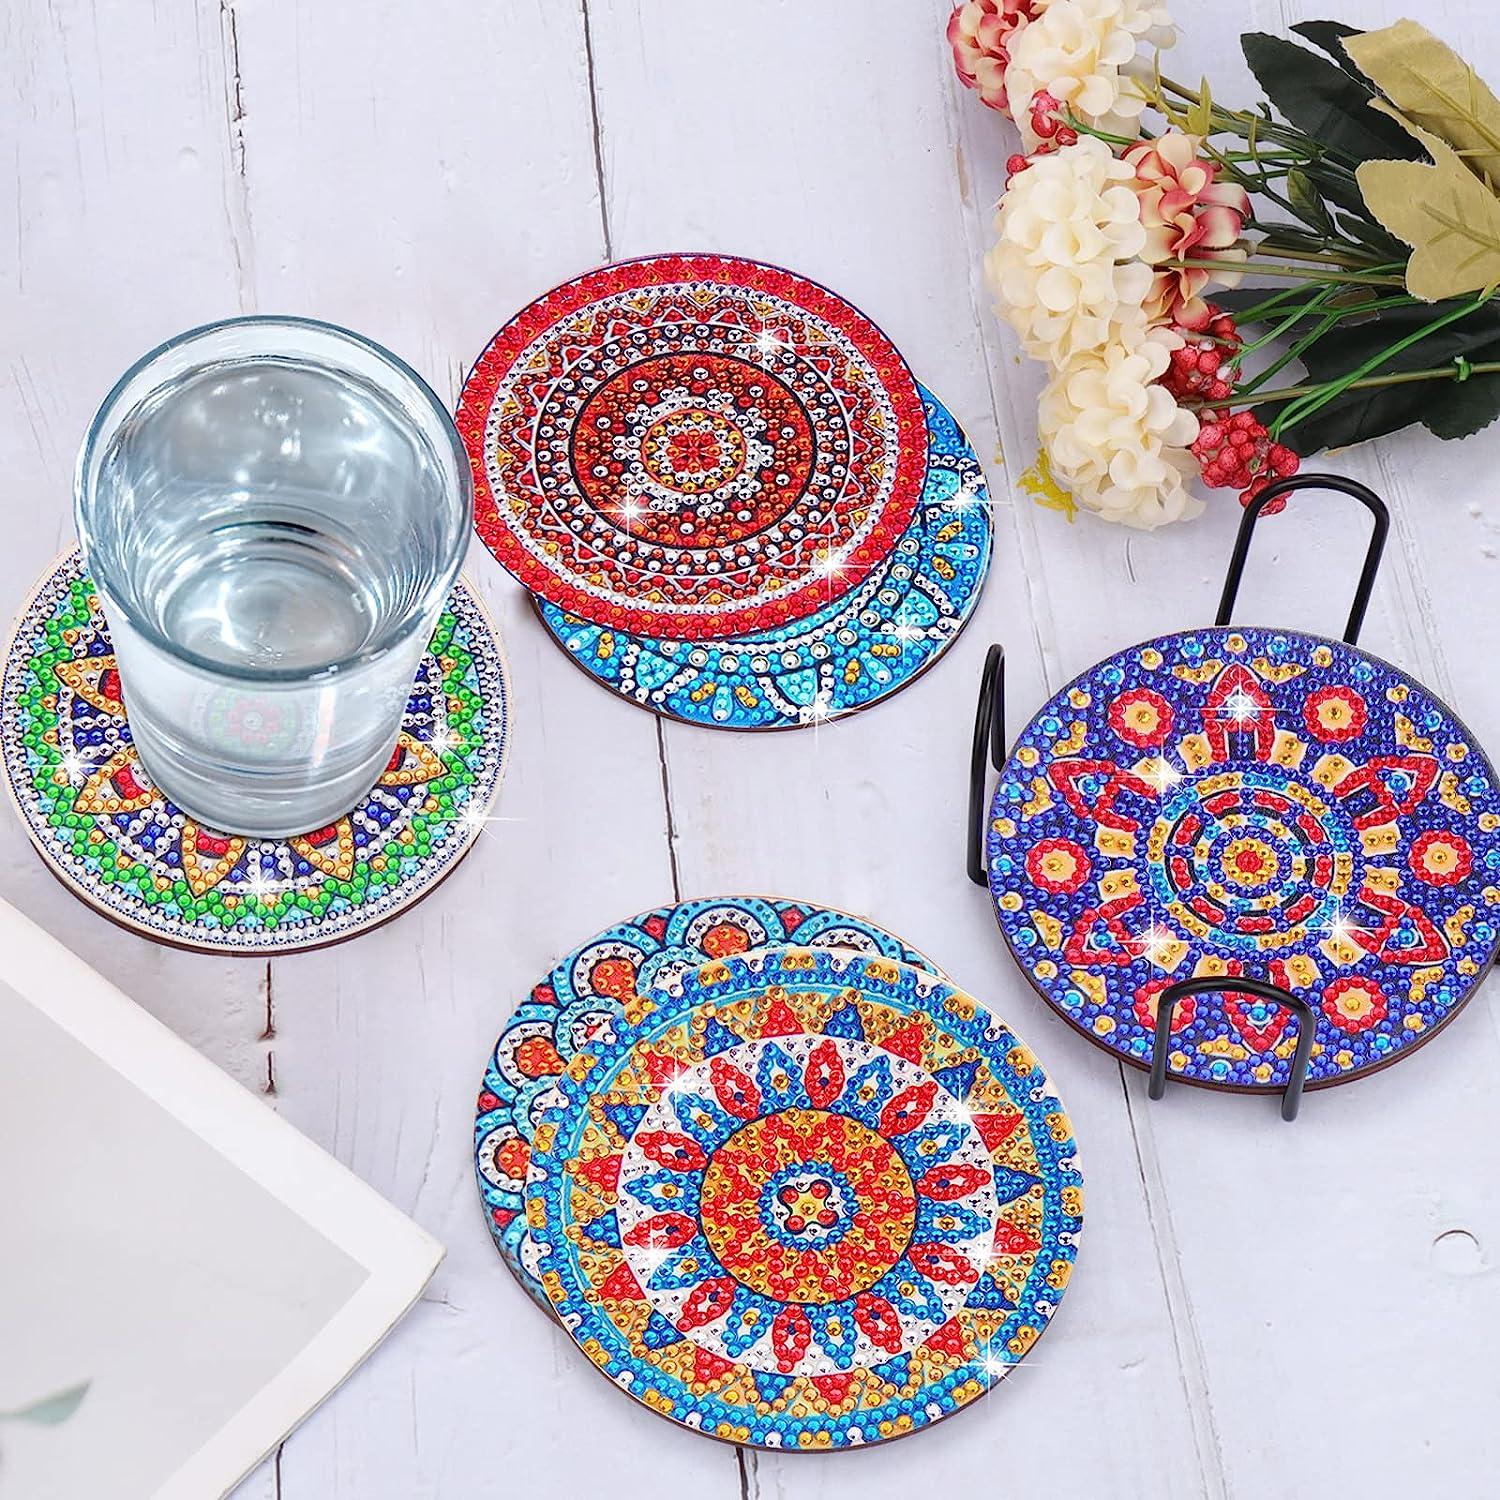 BSRESIN 8 Pcs Coasters with Holder Mandala DIY Diamond Art Crafts for Adults  Small Diamond Painting Kits Accessories